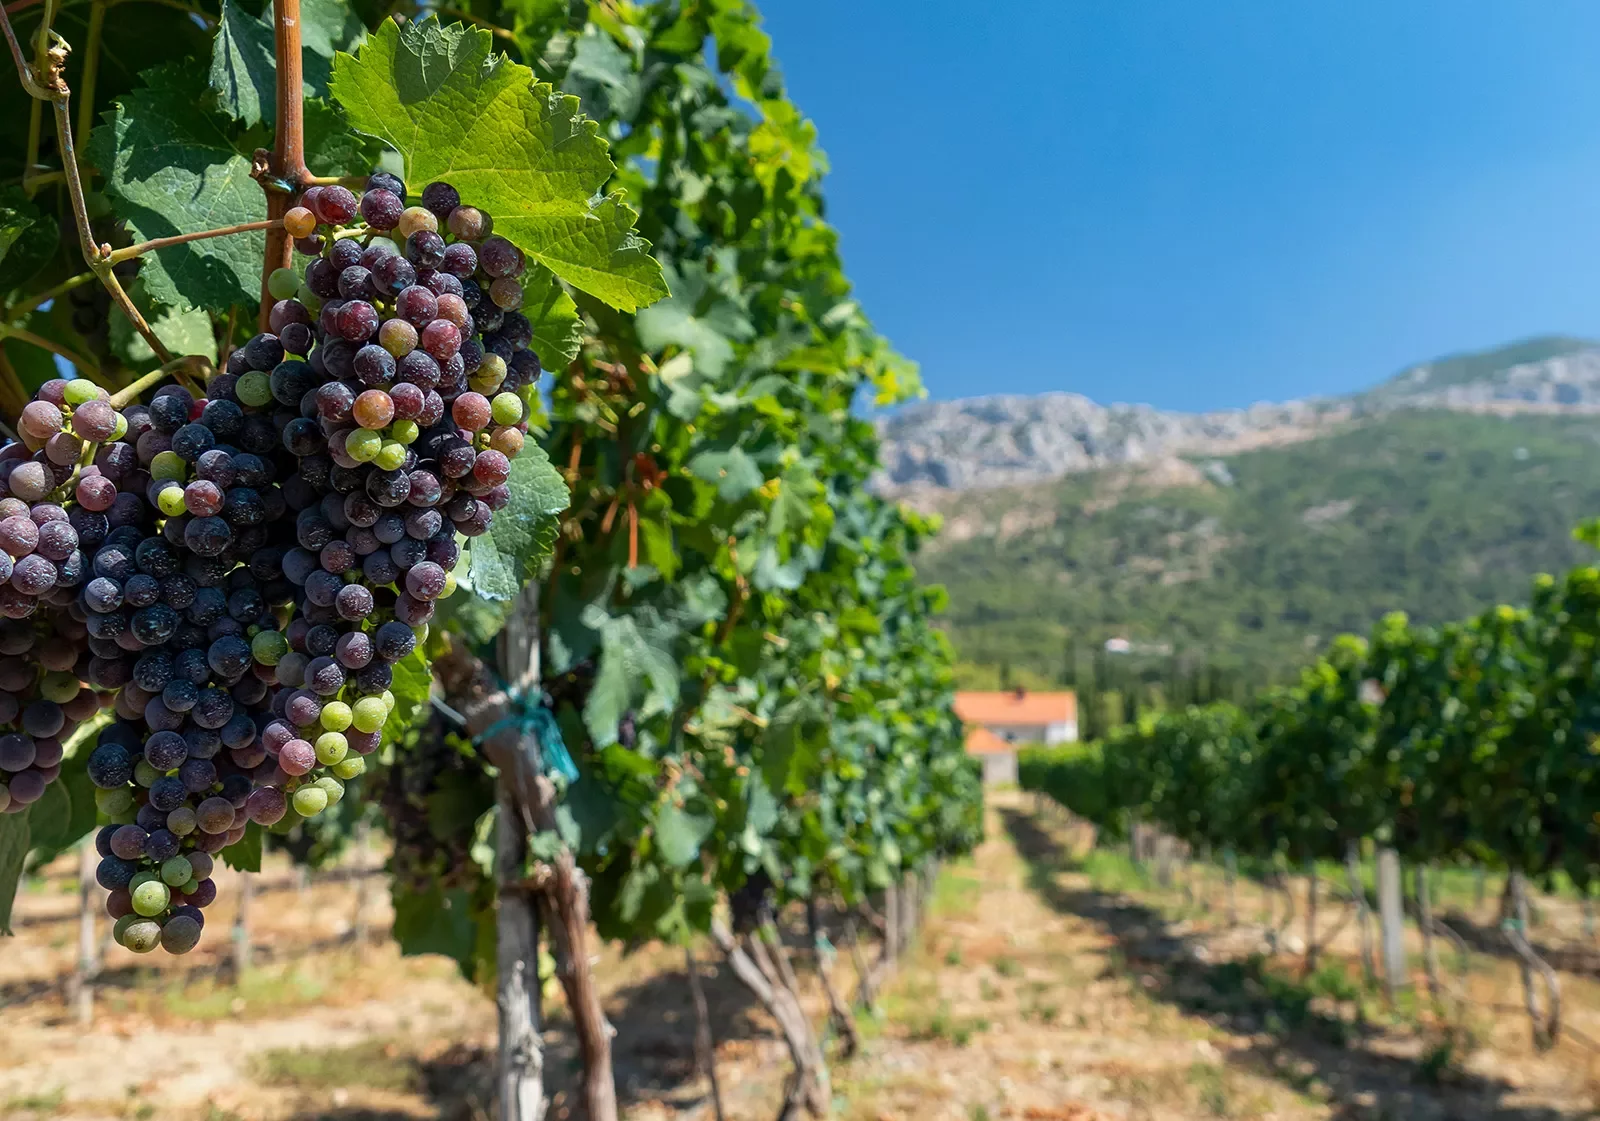 Close-up of red wine grapes, other vines, mountain in distance.